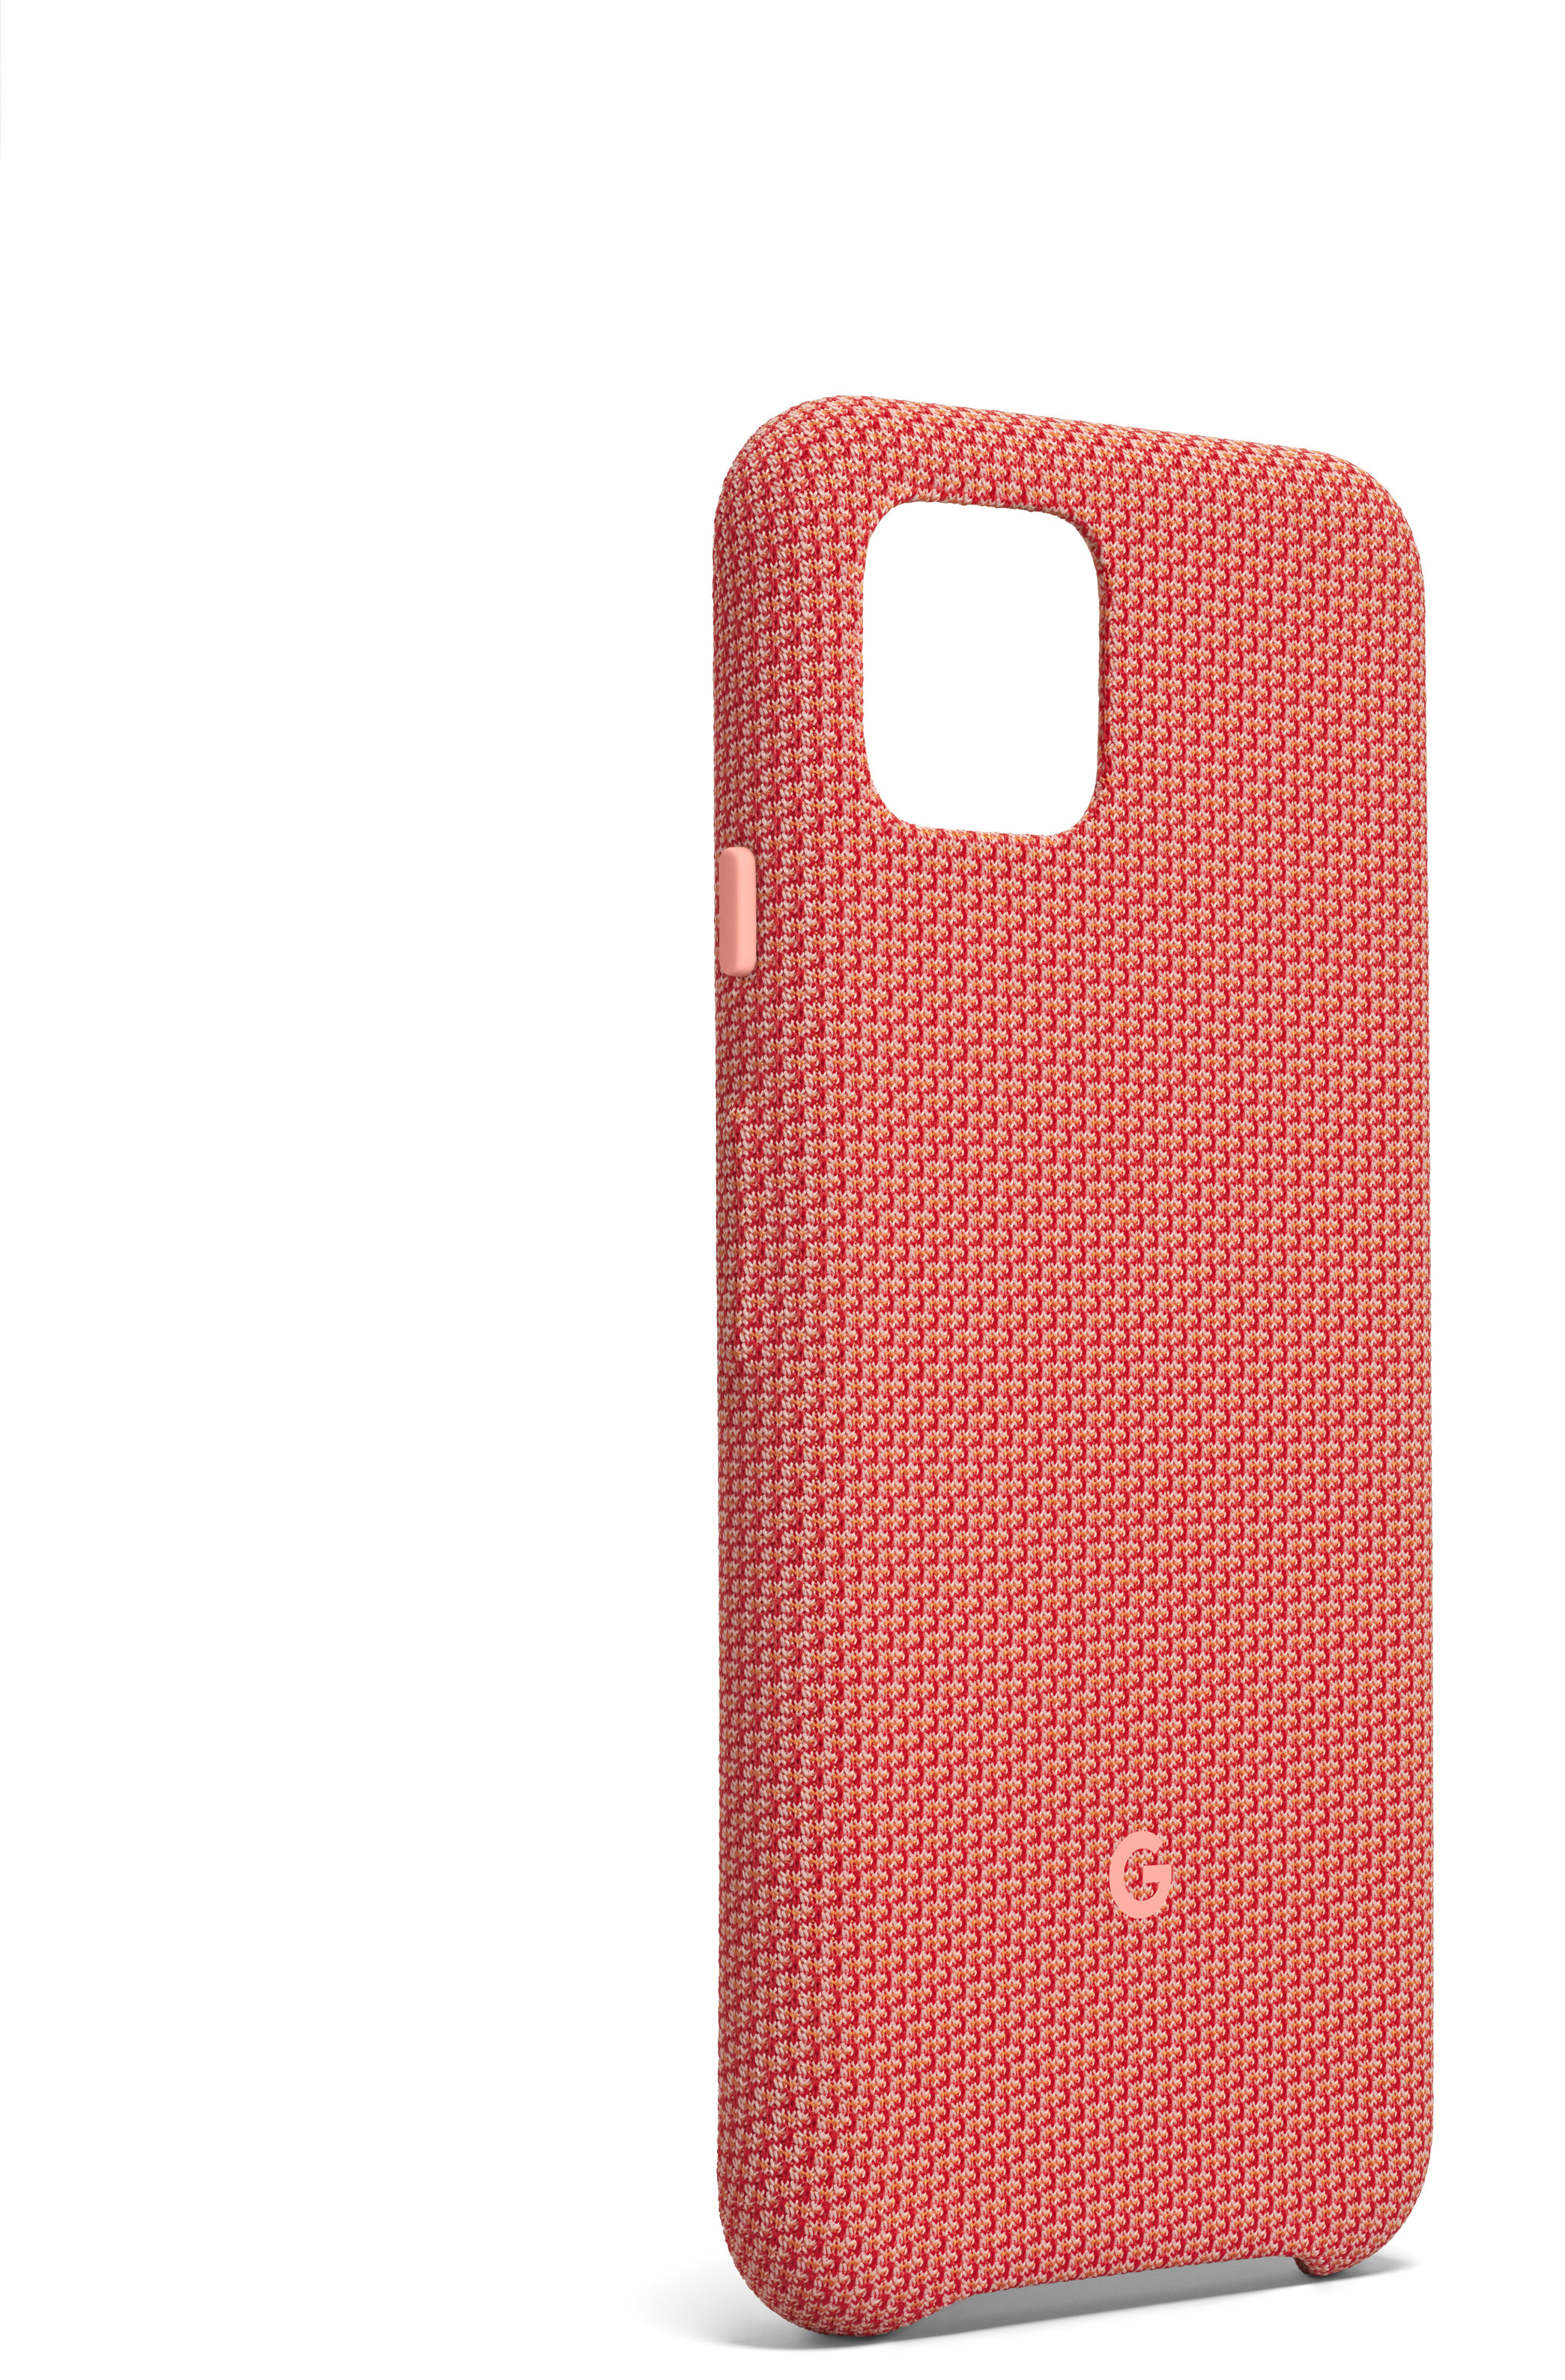 4, Pixel be Backcover, Google, Could Coral GA01282, GOOGLE